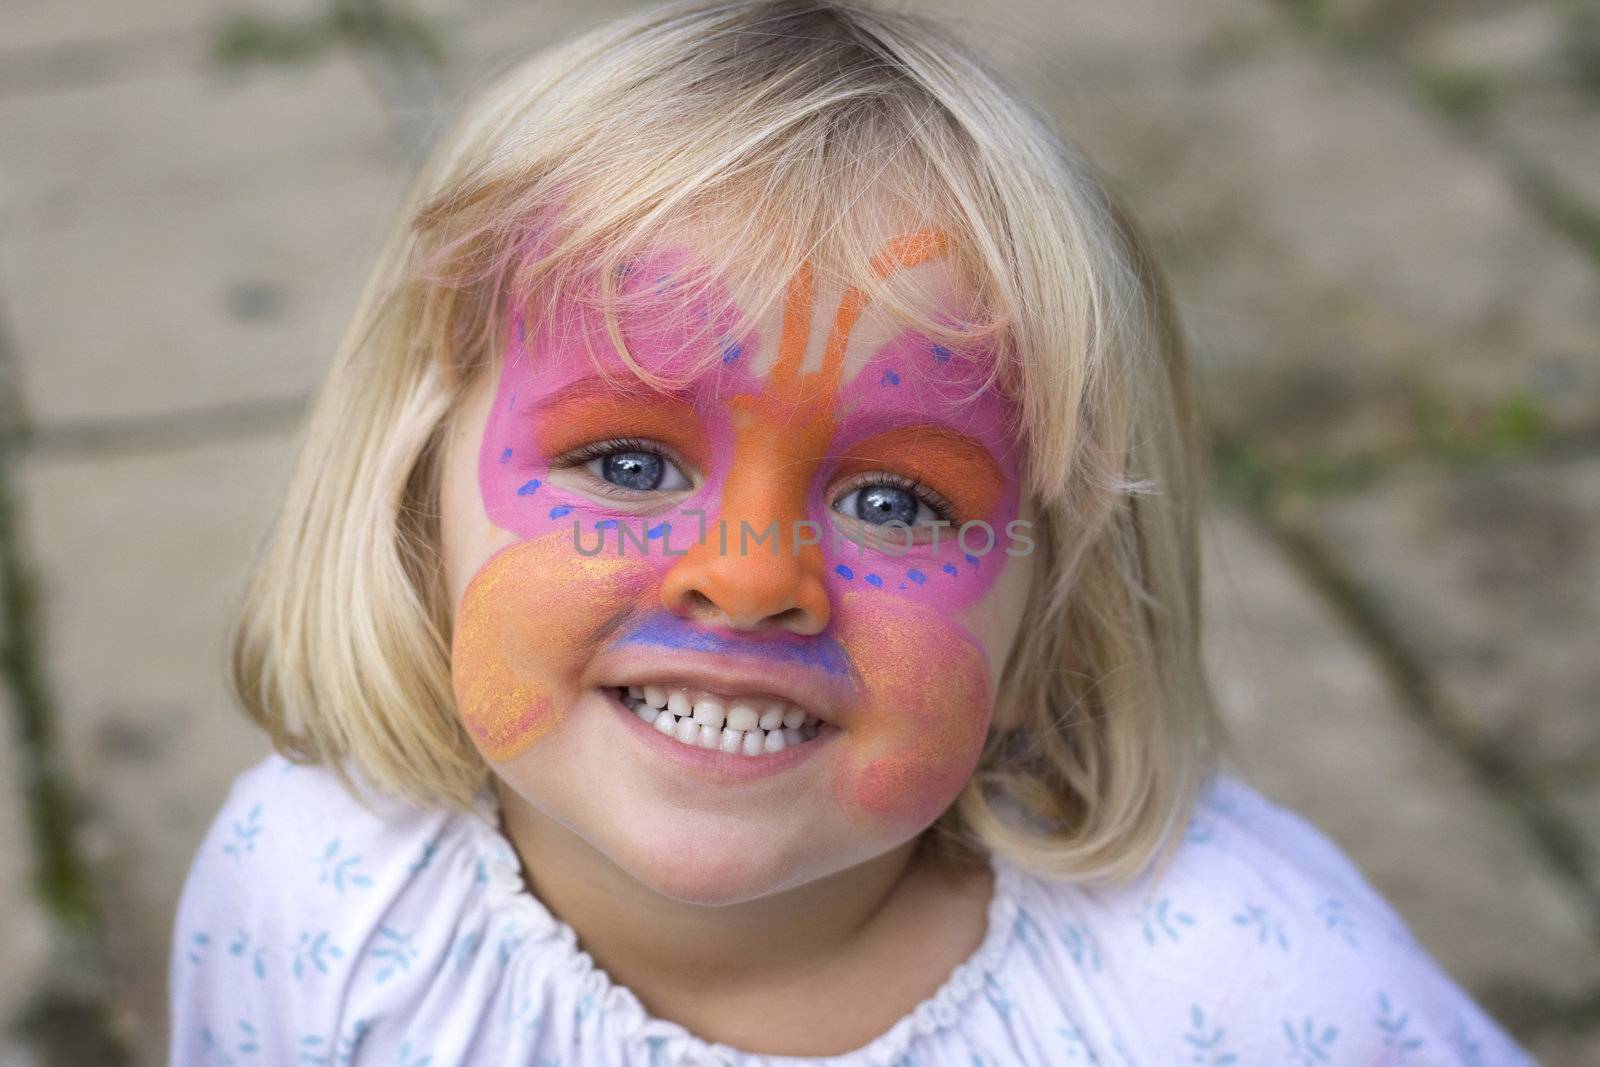 A 4 year old girl smiling at the camera with a butterfly painted over her face